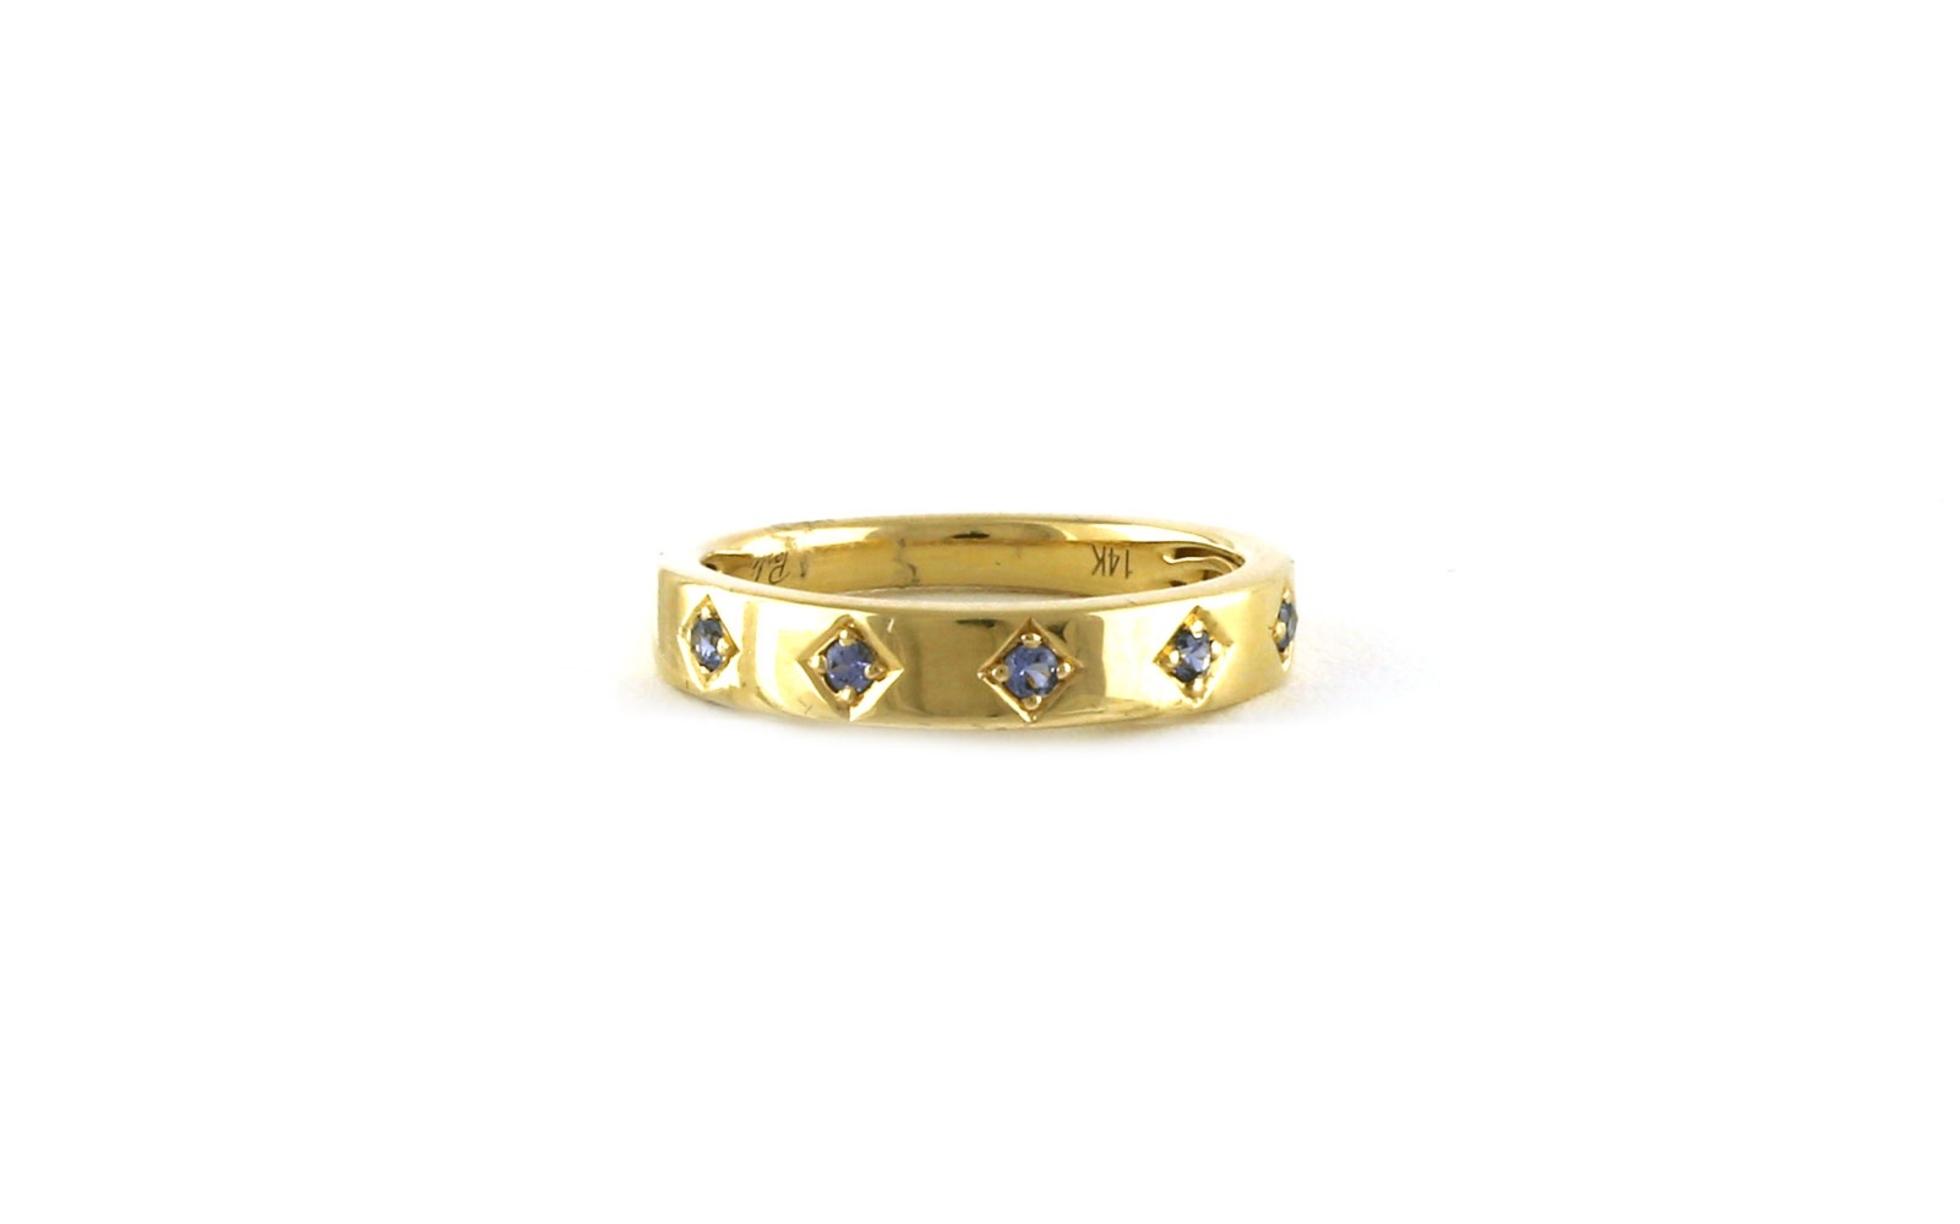 5-Stone Montana Yogo Sapphire Ring in Yellow Gold (0.13cts TWT)